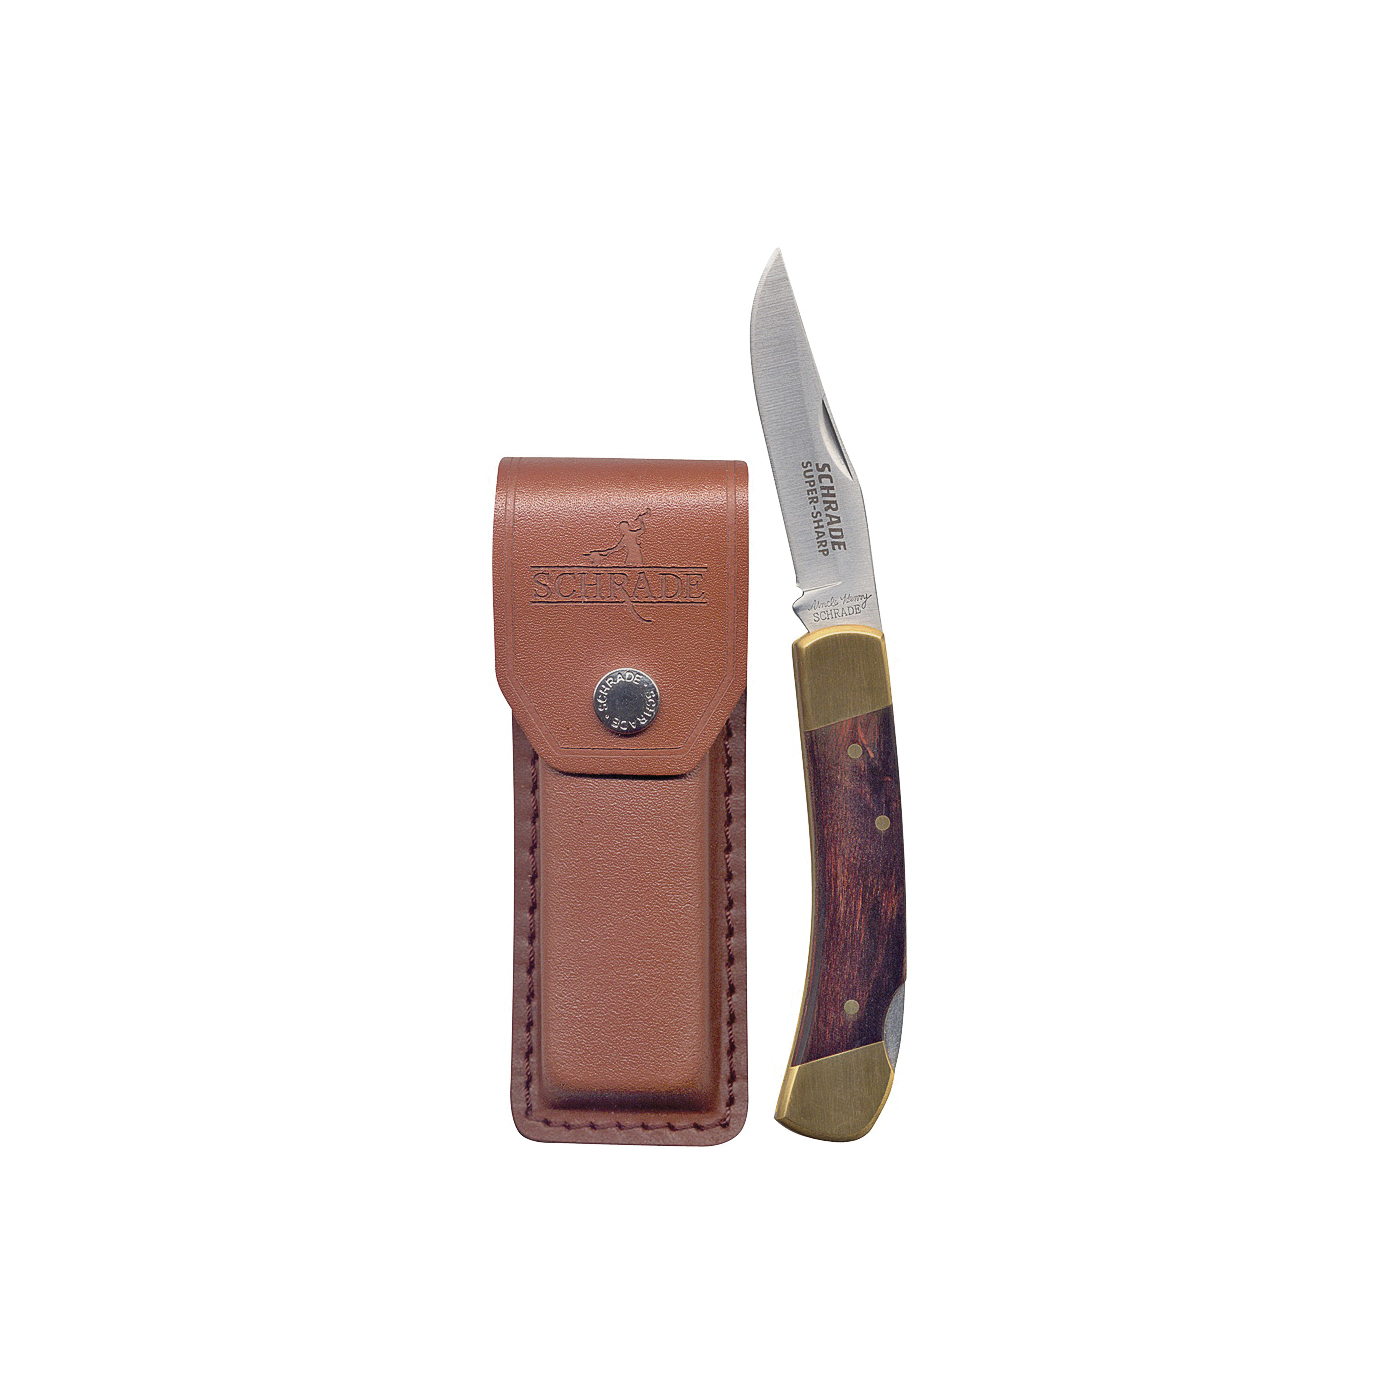 Uncle Henry LB5 Pocket Knife, 2.8 in L Blade, 7Cr17 High Carbon Stainless Steel Blade, 1-Blade